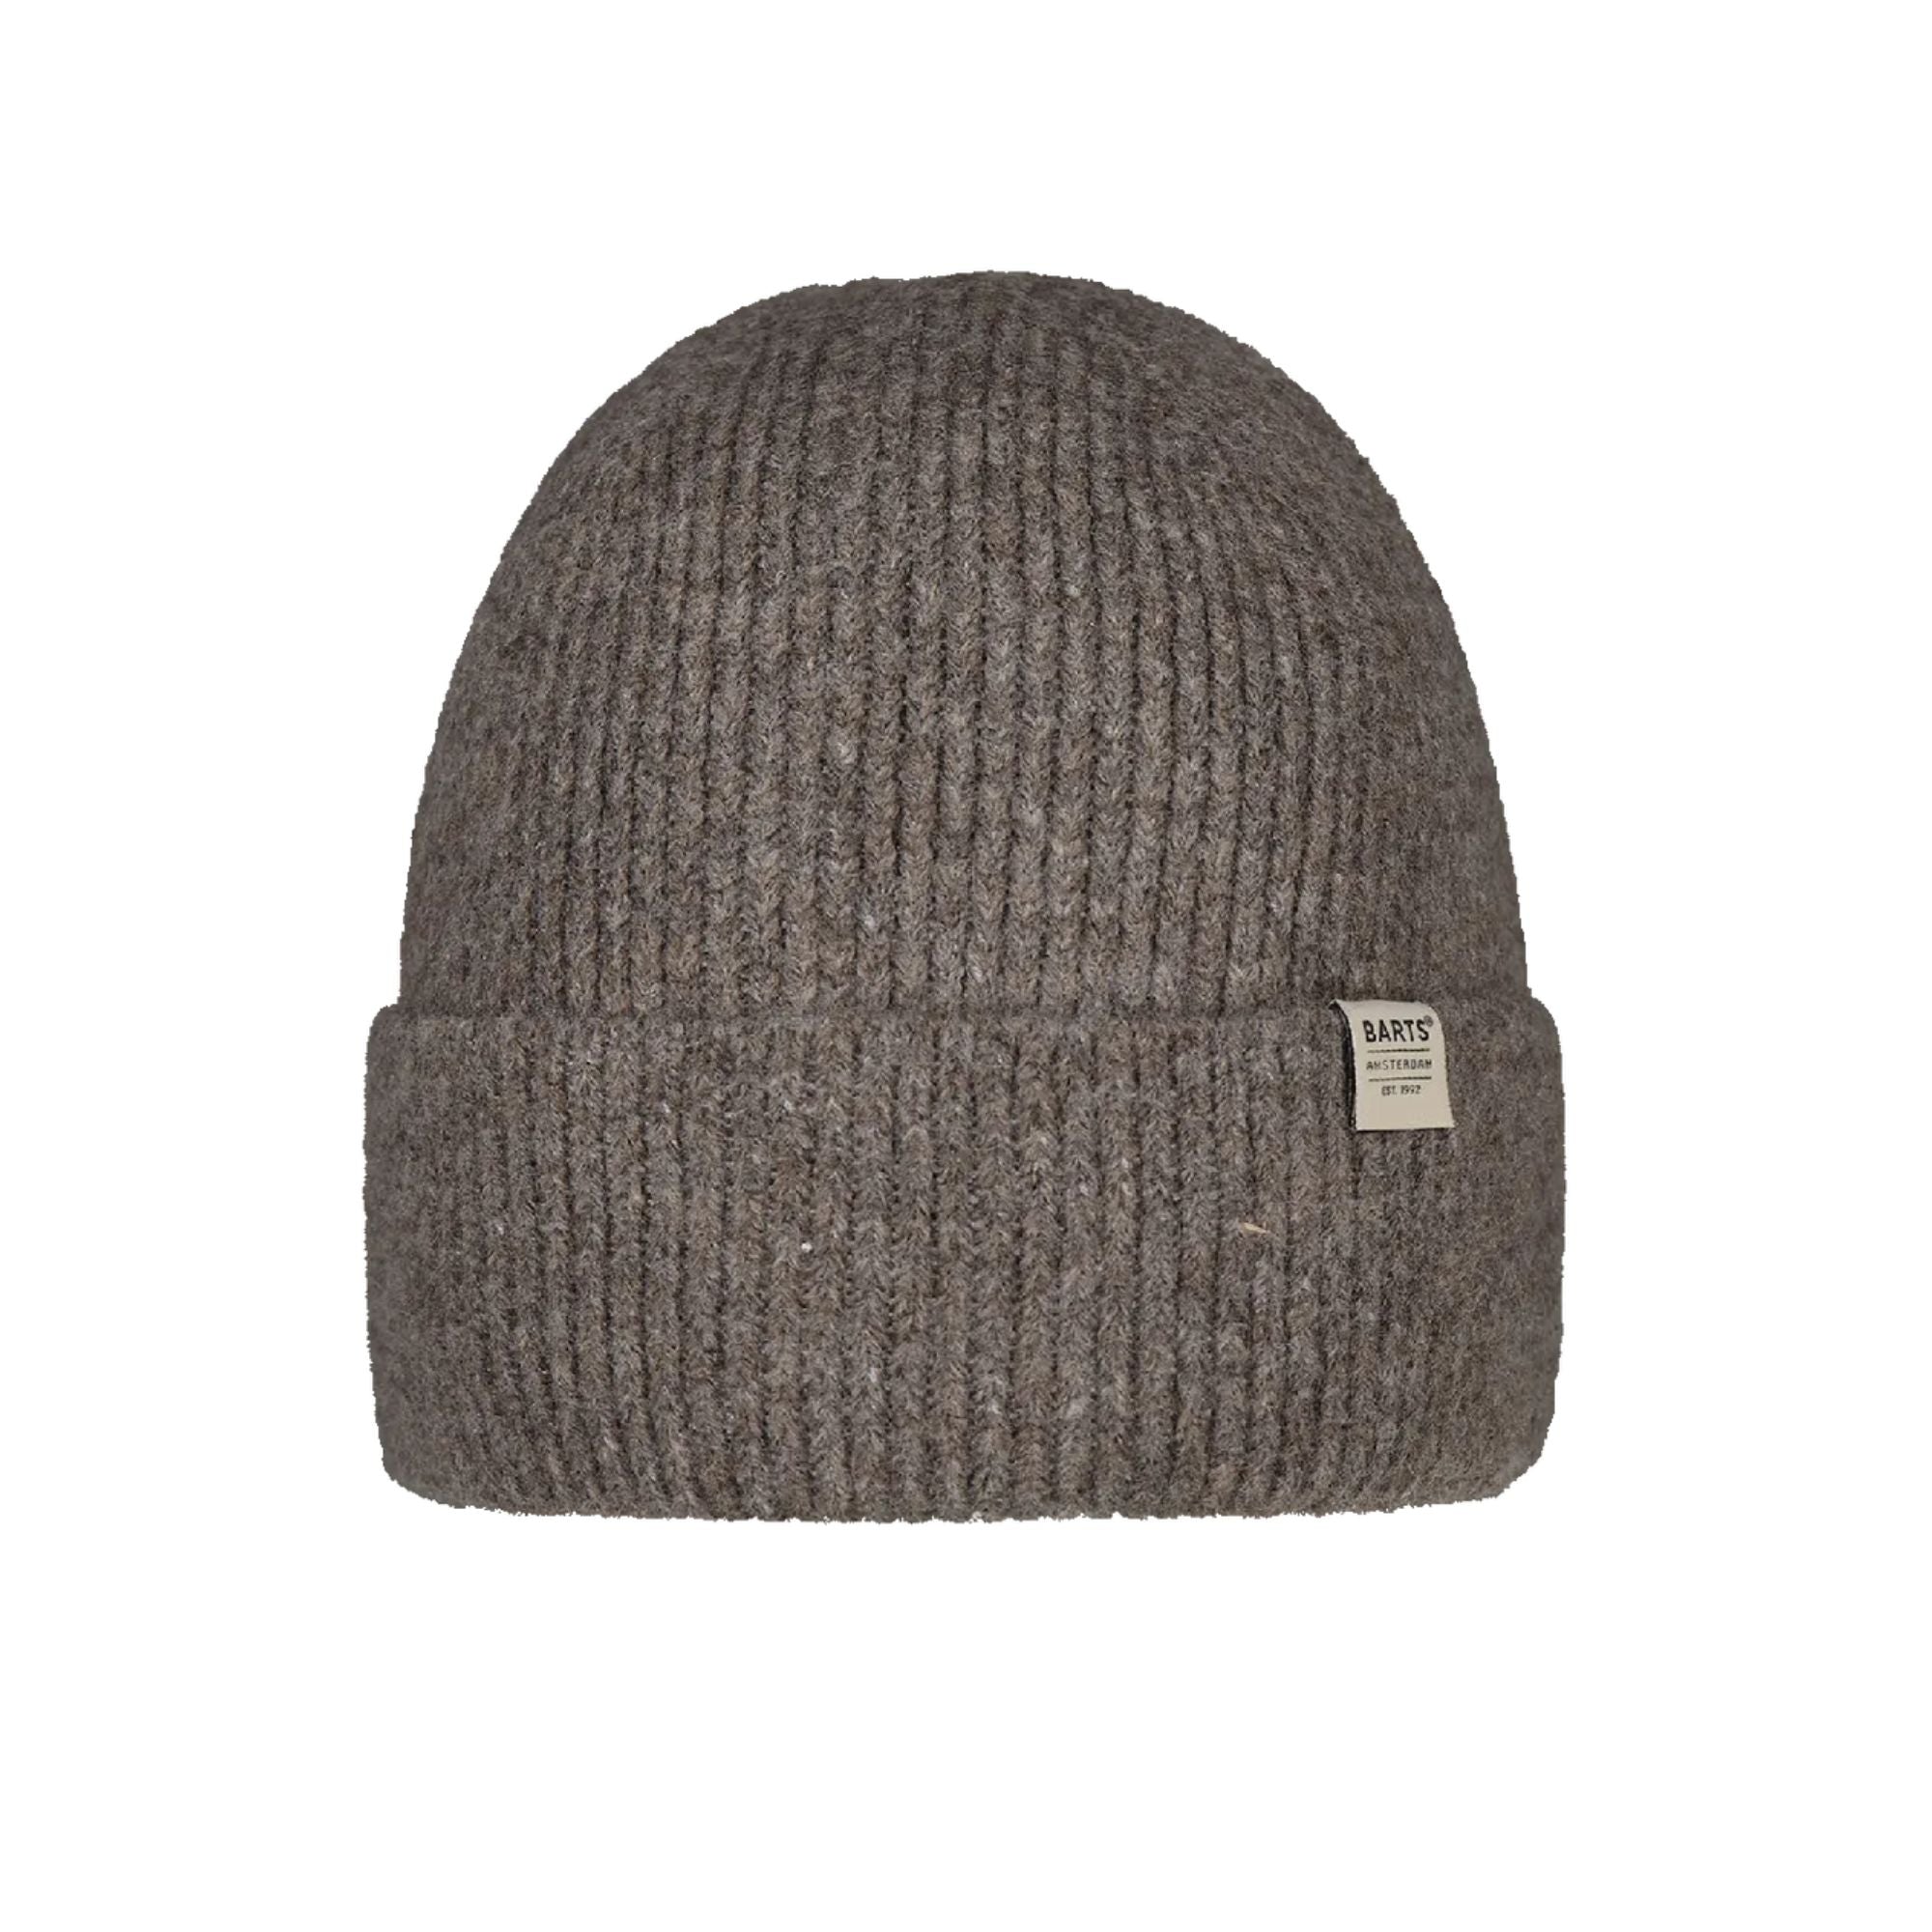 BARTS Willian Beanie | BARTS | Portwest - The Outdoor Shop